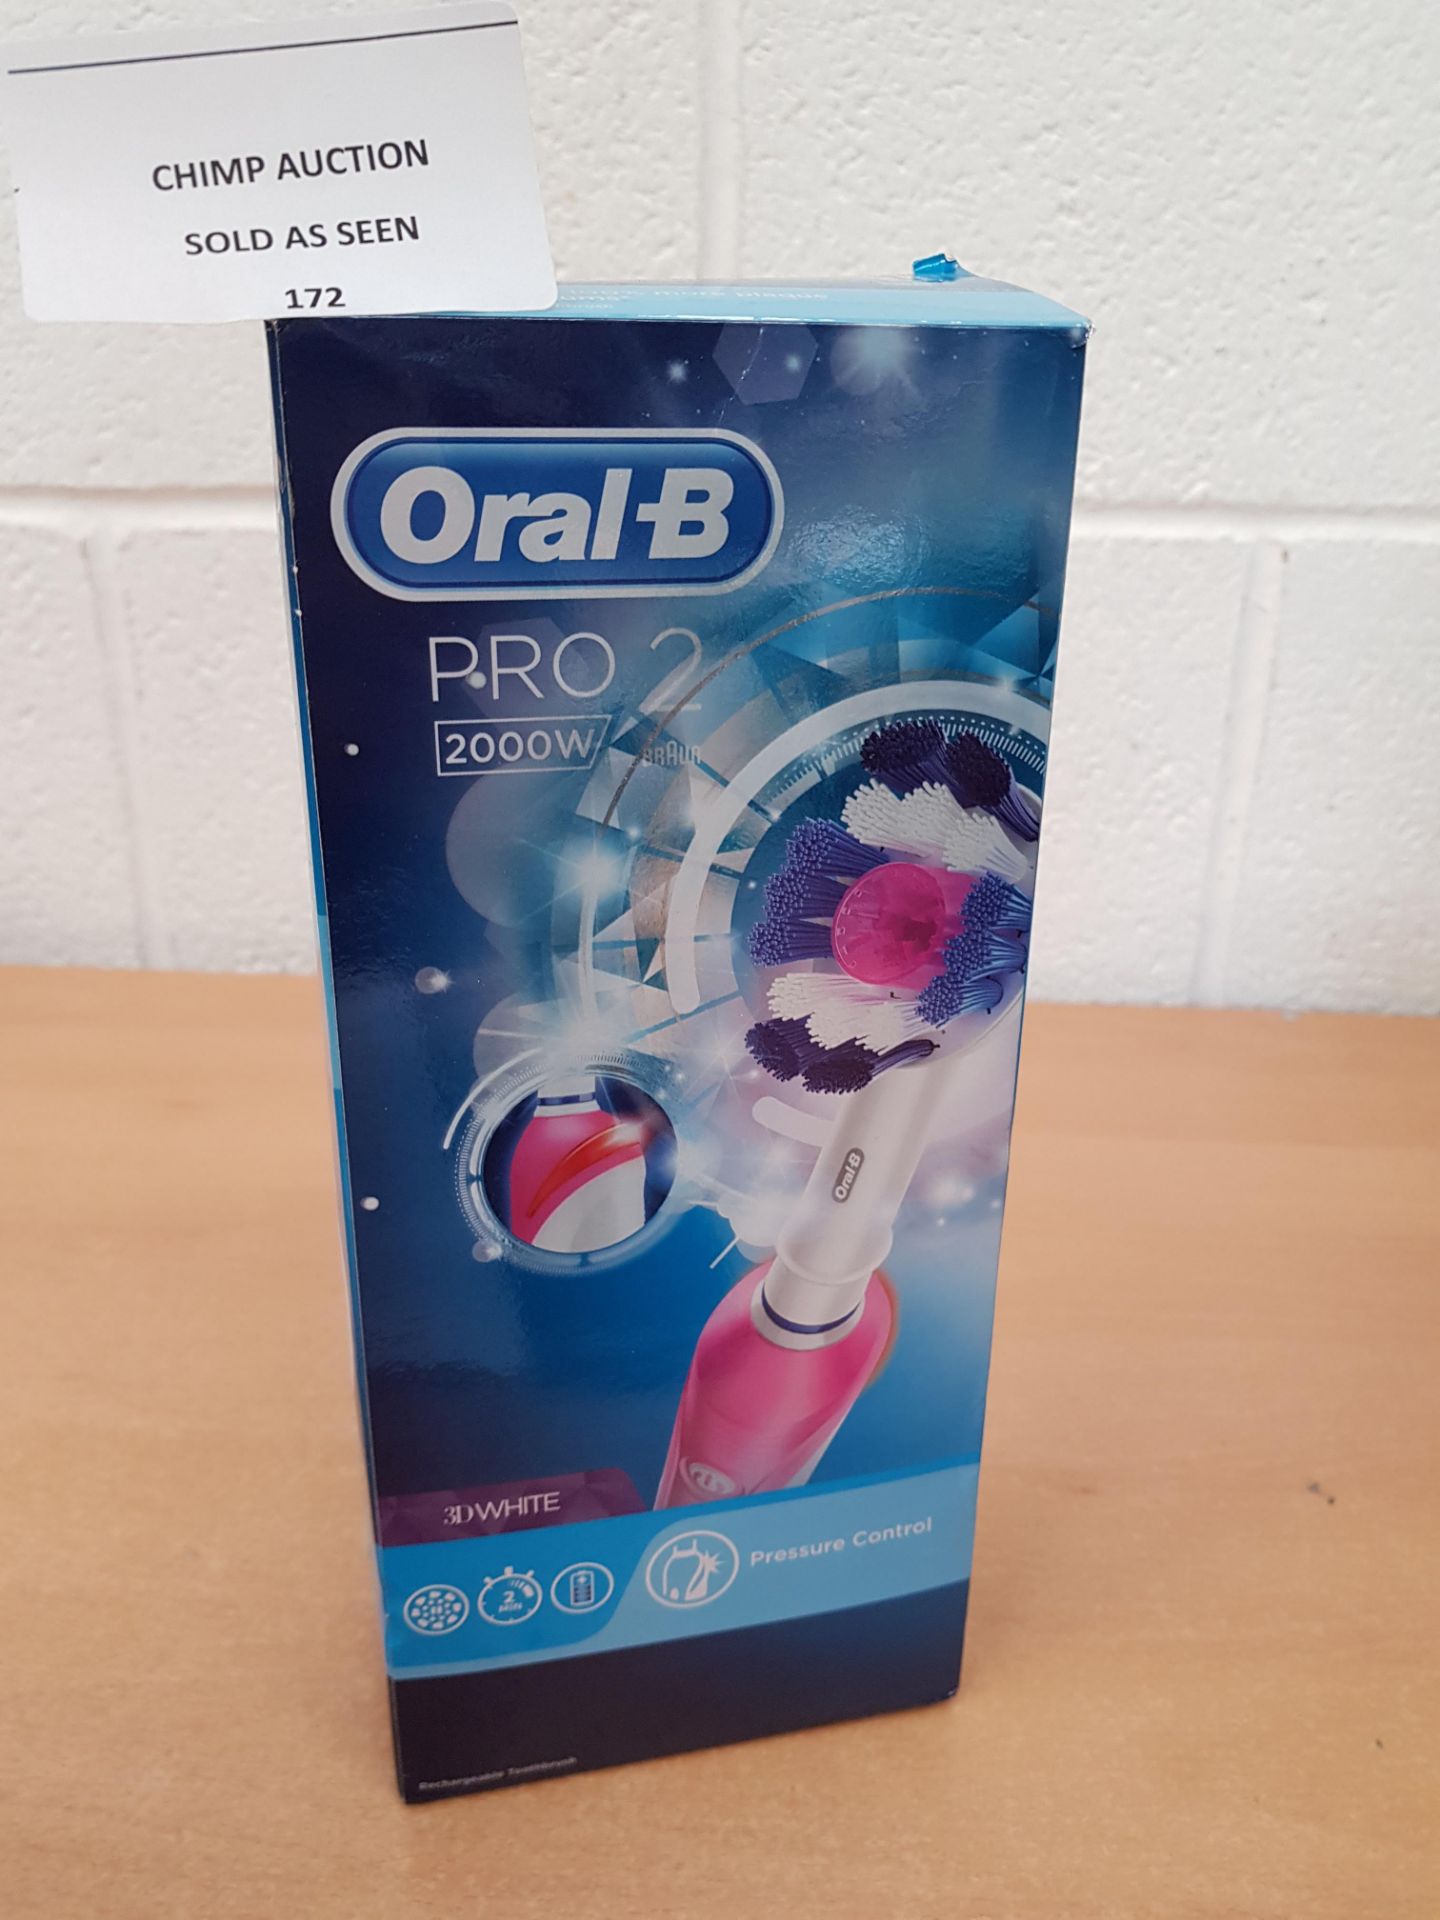 Oral-B Pro 2 2000w electric toothbrush